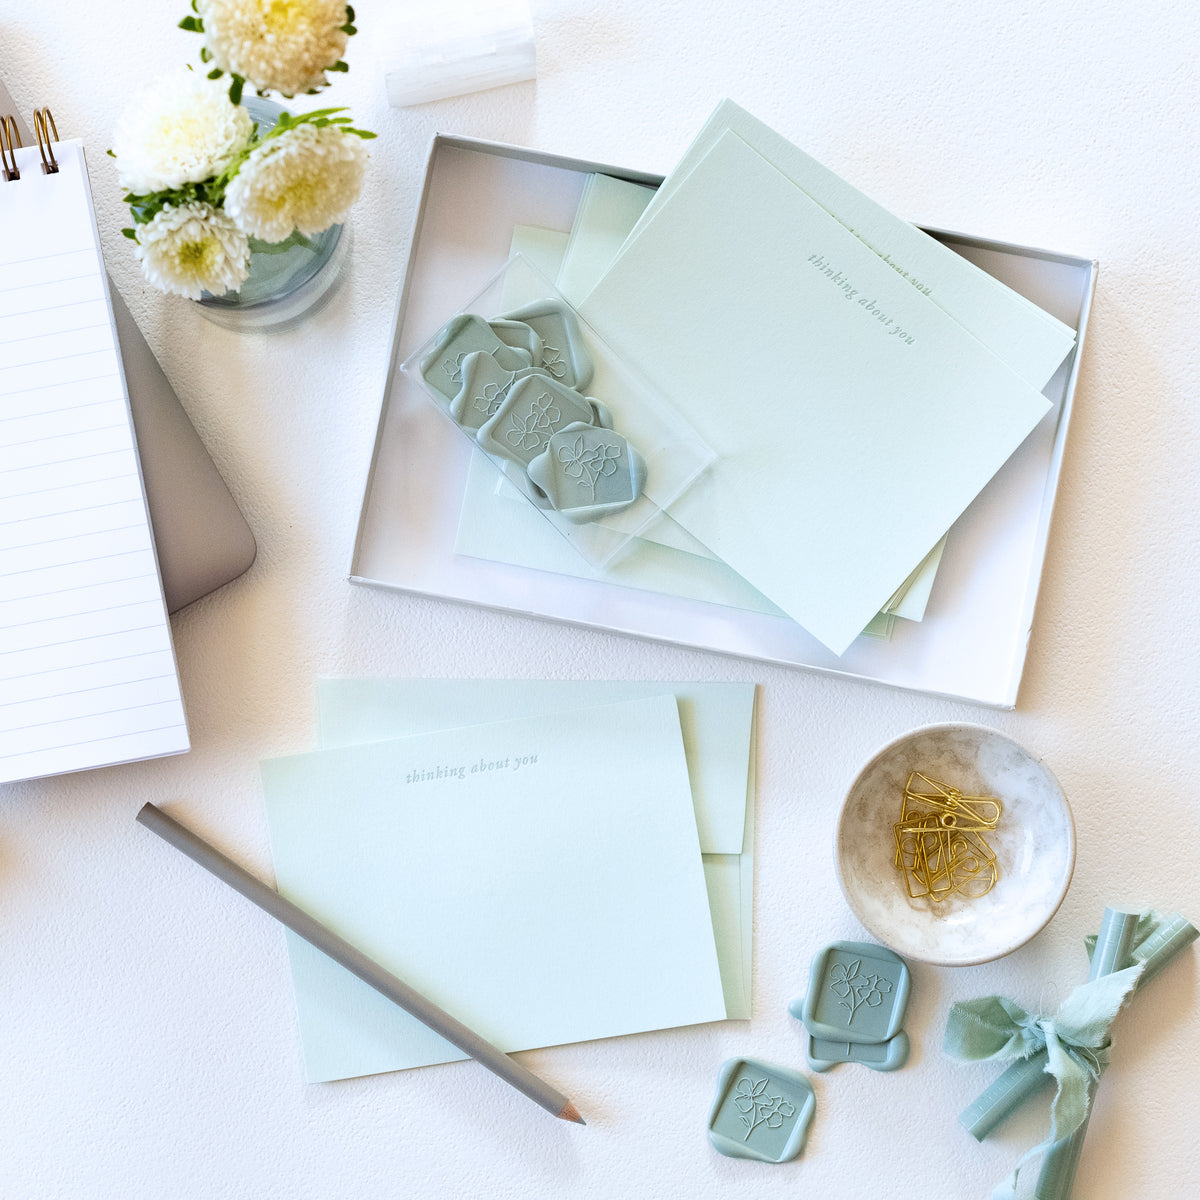 Our &quot;Thinking of You&quot; flat note stationery set includes a set of 6 hand printed cards and envelopes with 6 professional grade, self adhesive wax seals.